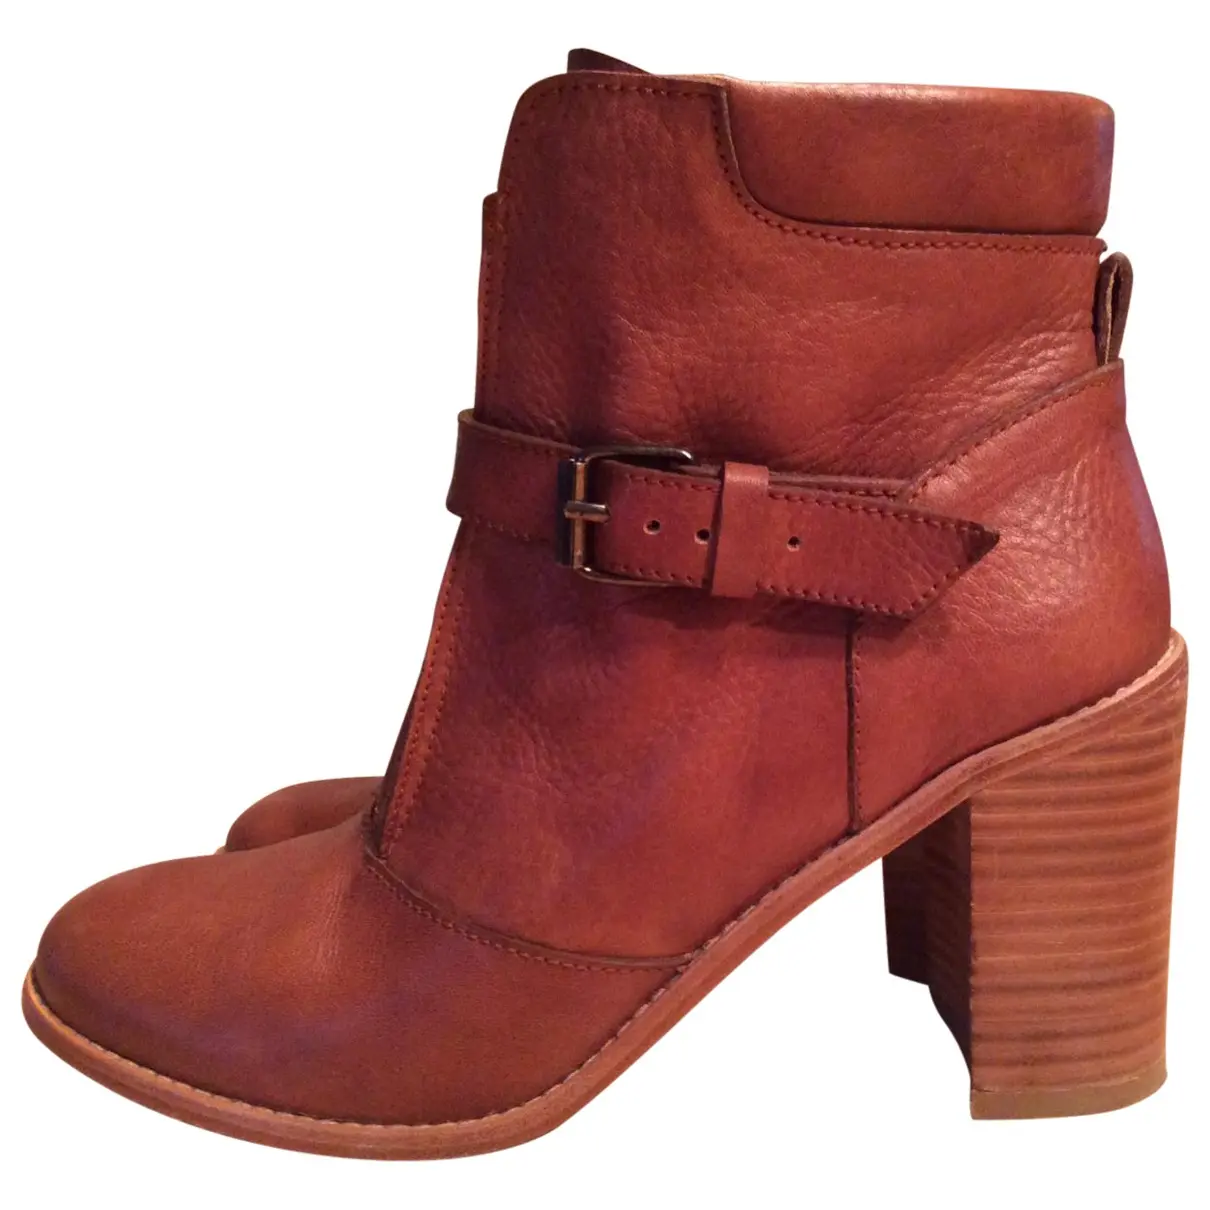 Leather ankle boots Vanessa Bruno Athe